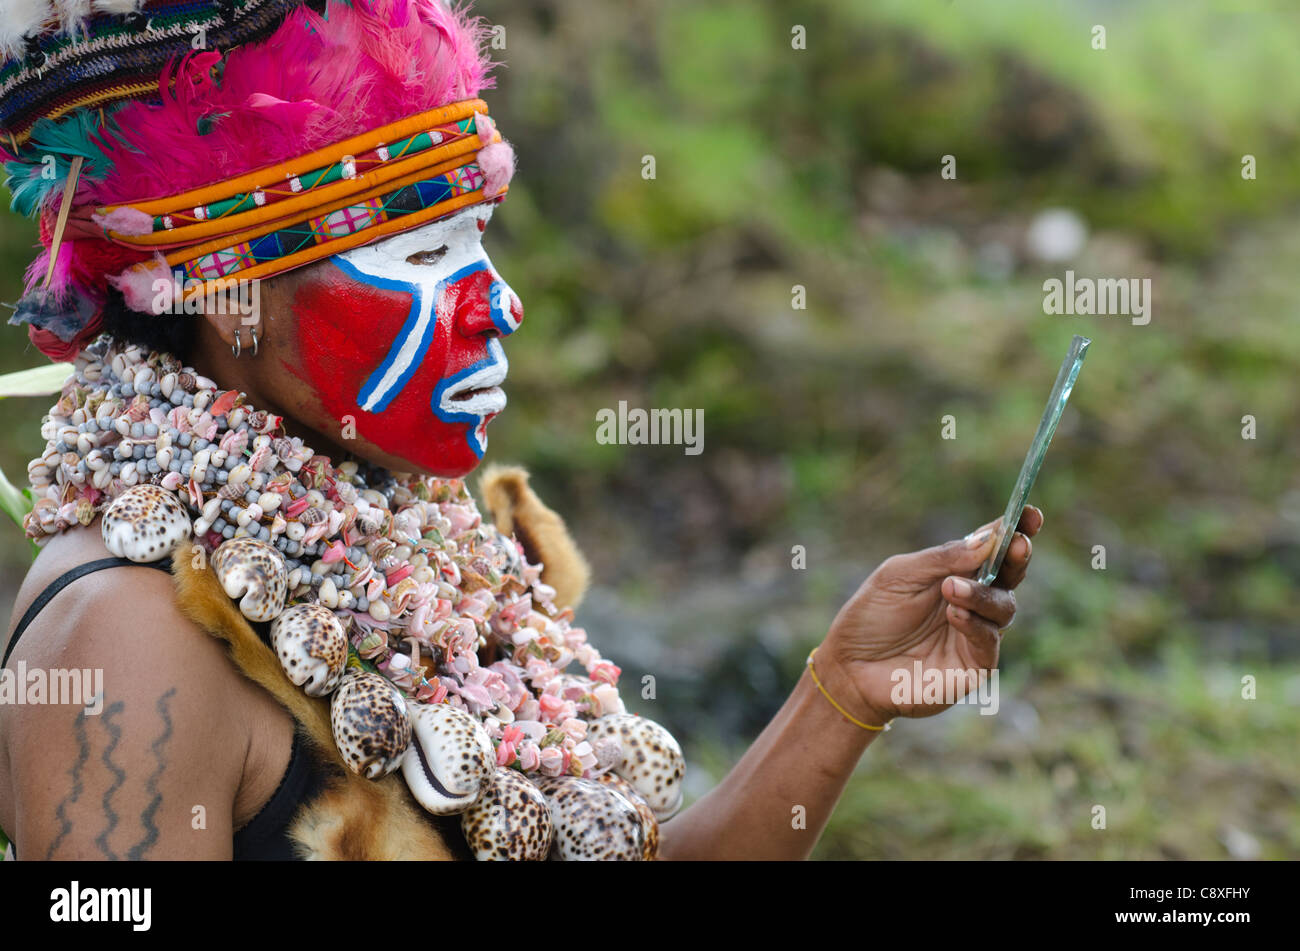 Jiawao Sing-sing group from Paiya in Western Highlands getting ready for Paiya Show Western Highlands Papua New Guinea Stock Photo